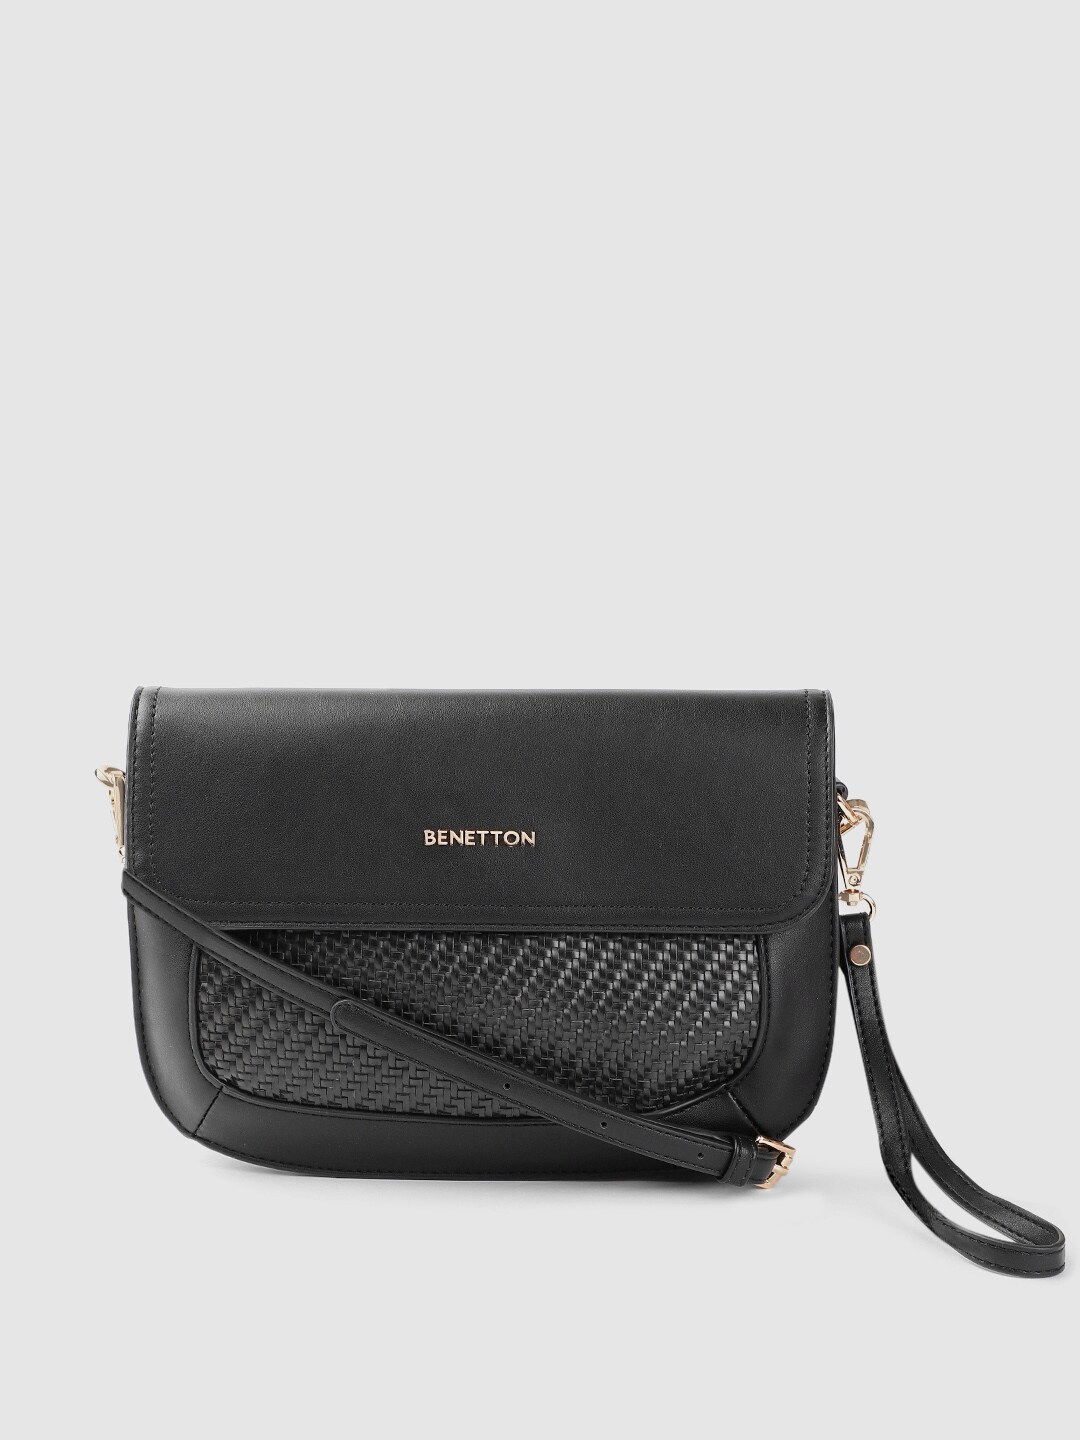 United Colors of Benetton Black Basket Weave Structured Sling Bag Price in India